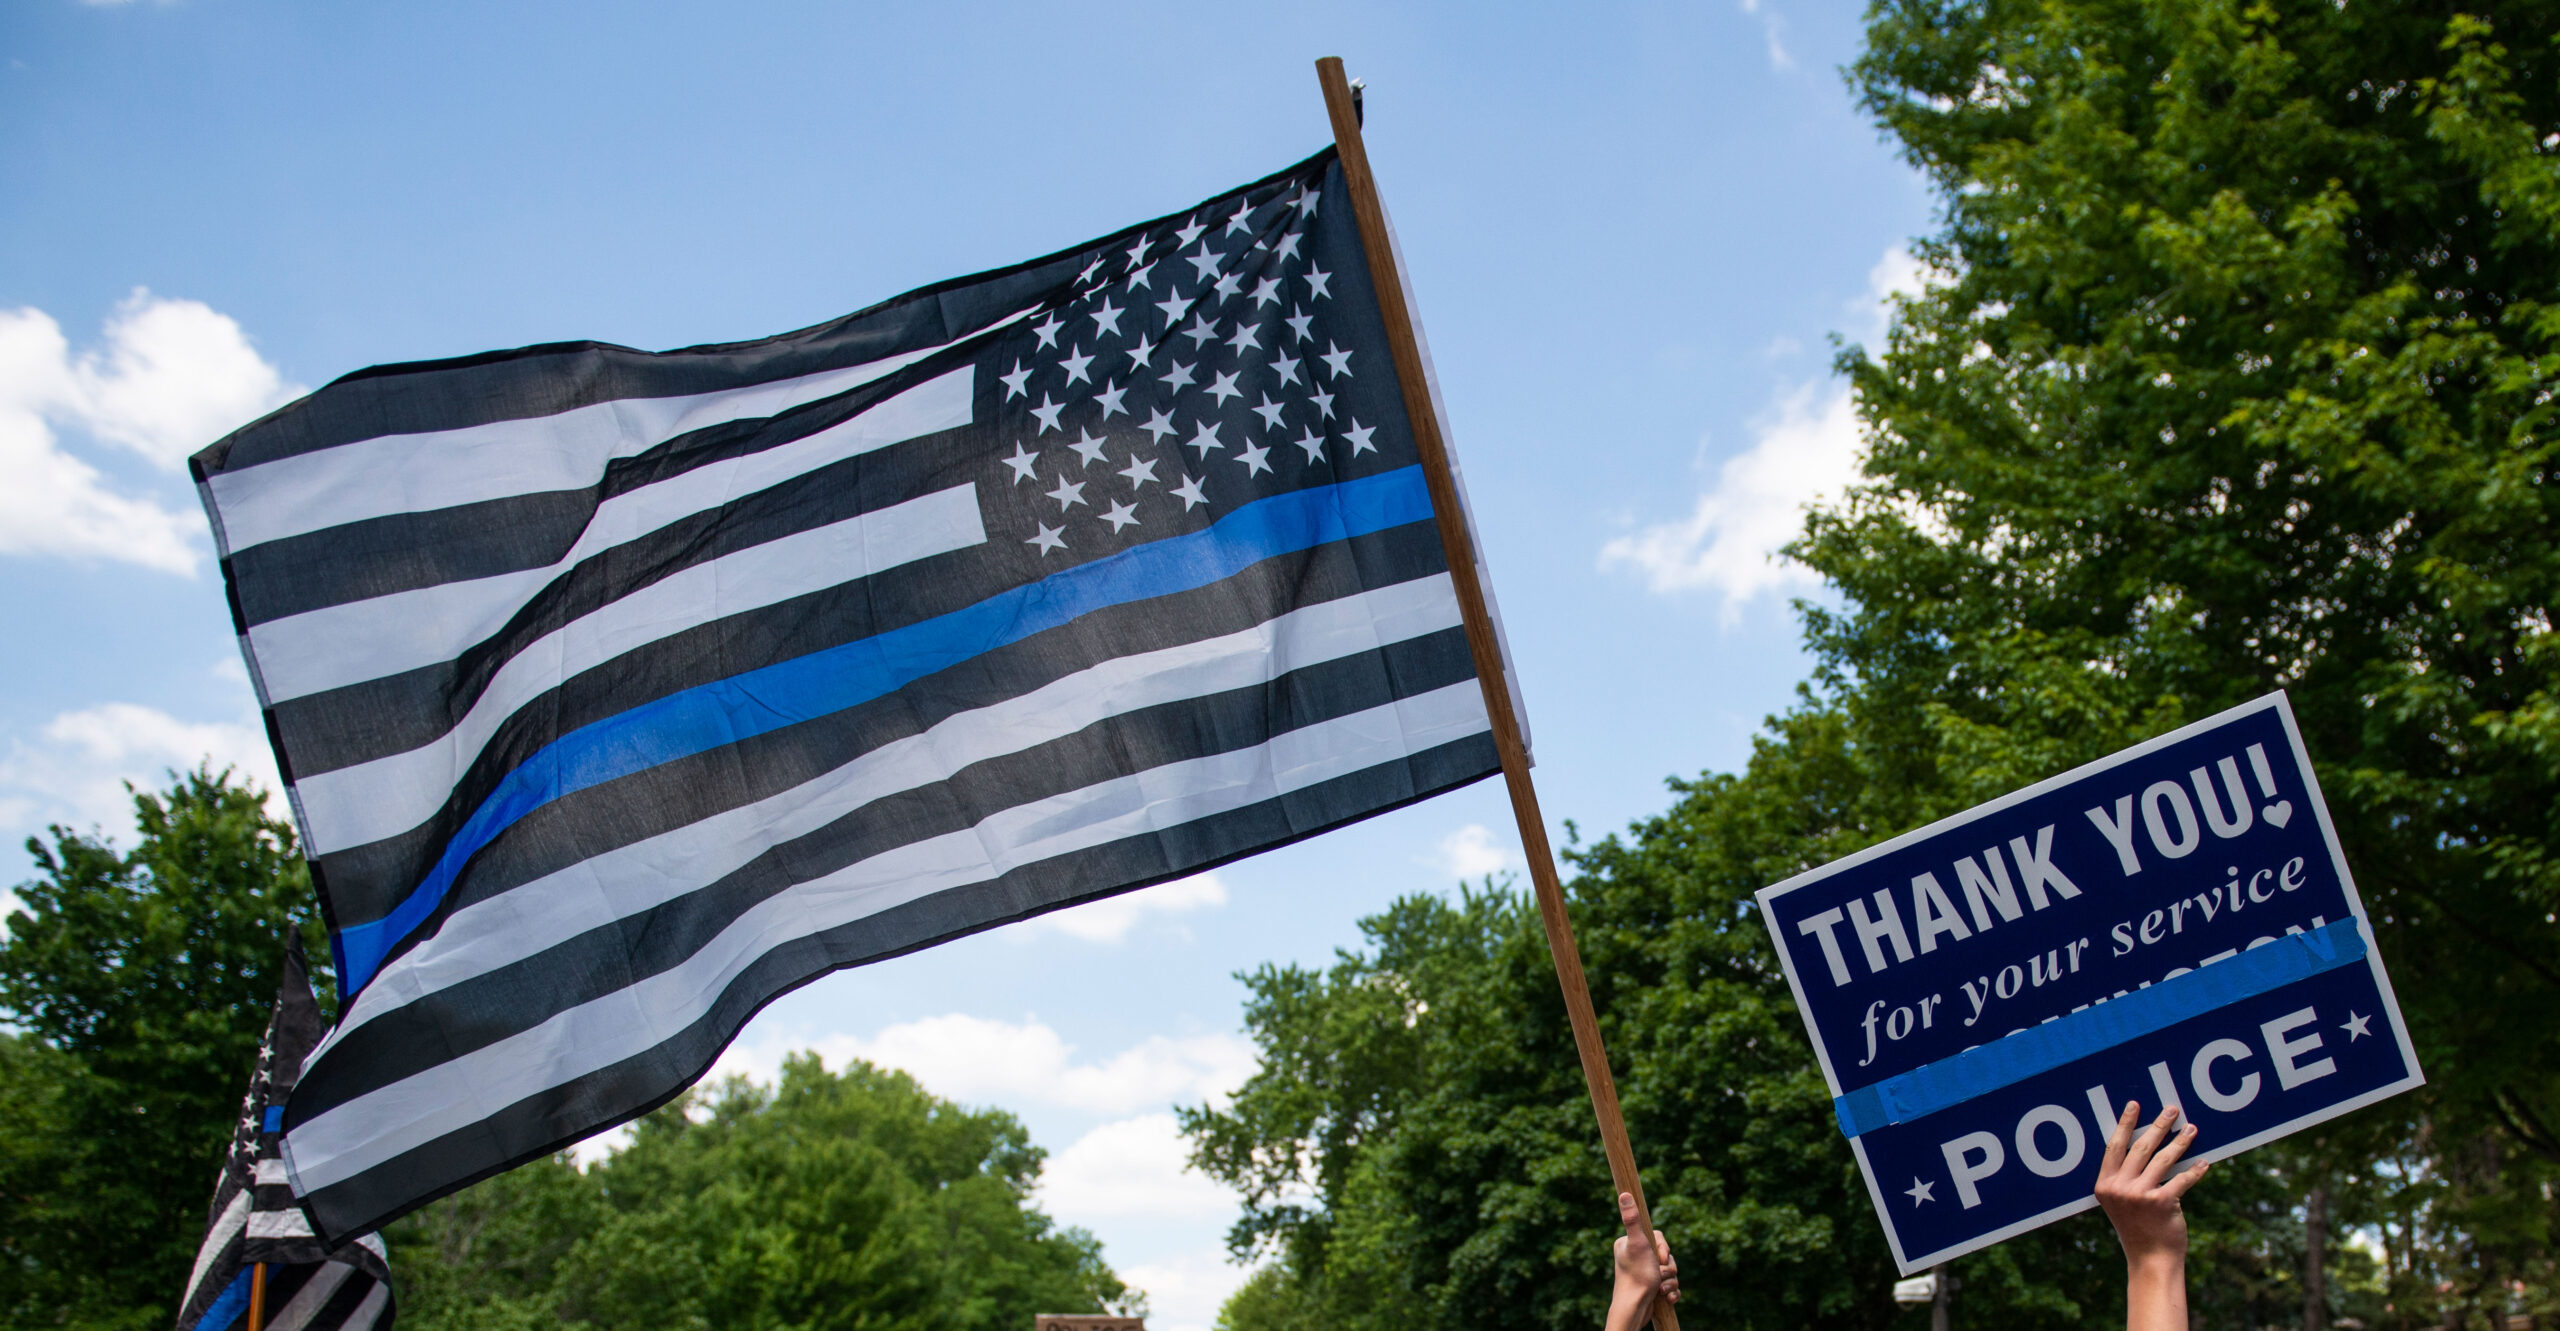 Teacher Reportedly Forced to Remove Pro-Police Flag While BLM, Pride Flags Allowed